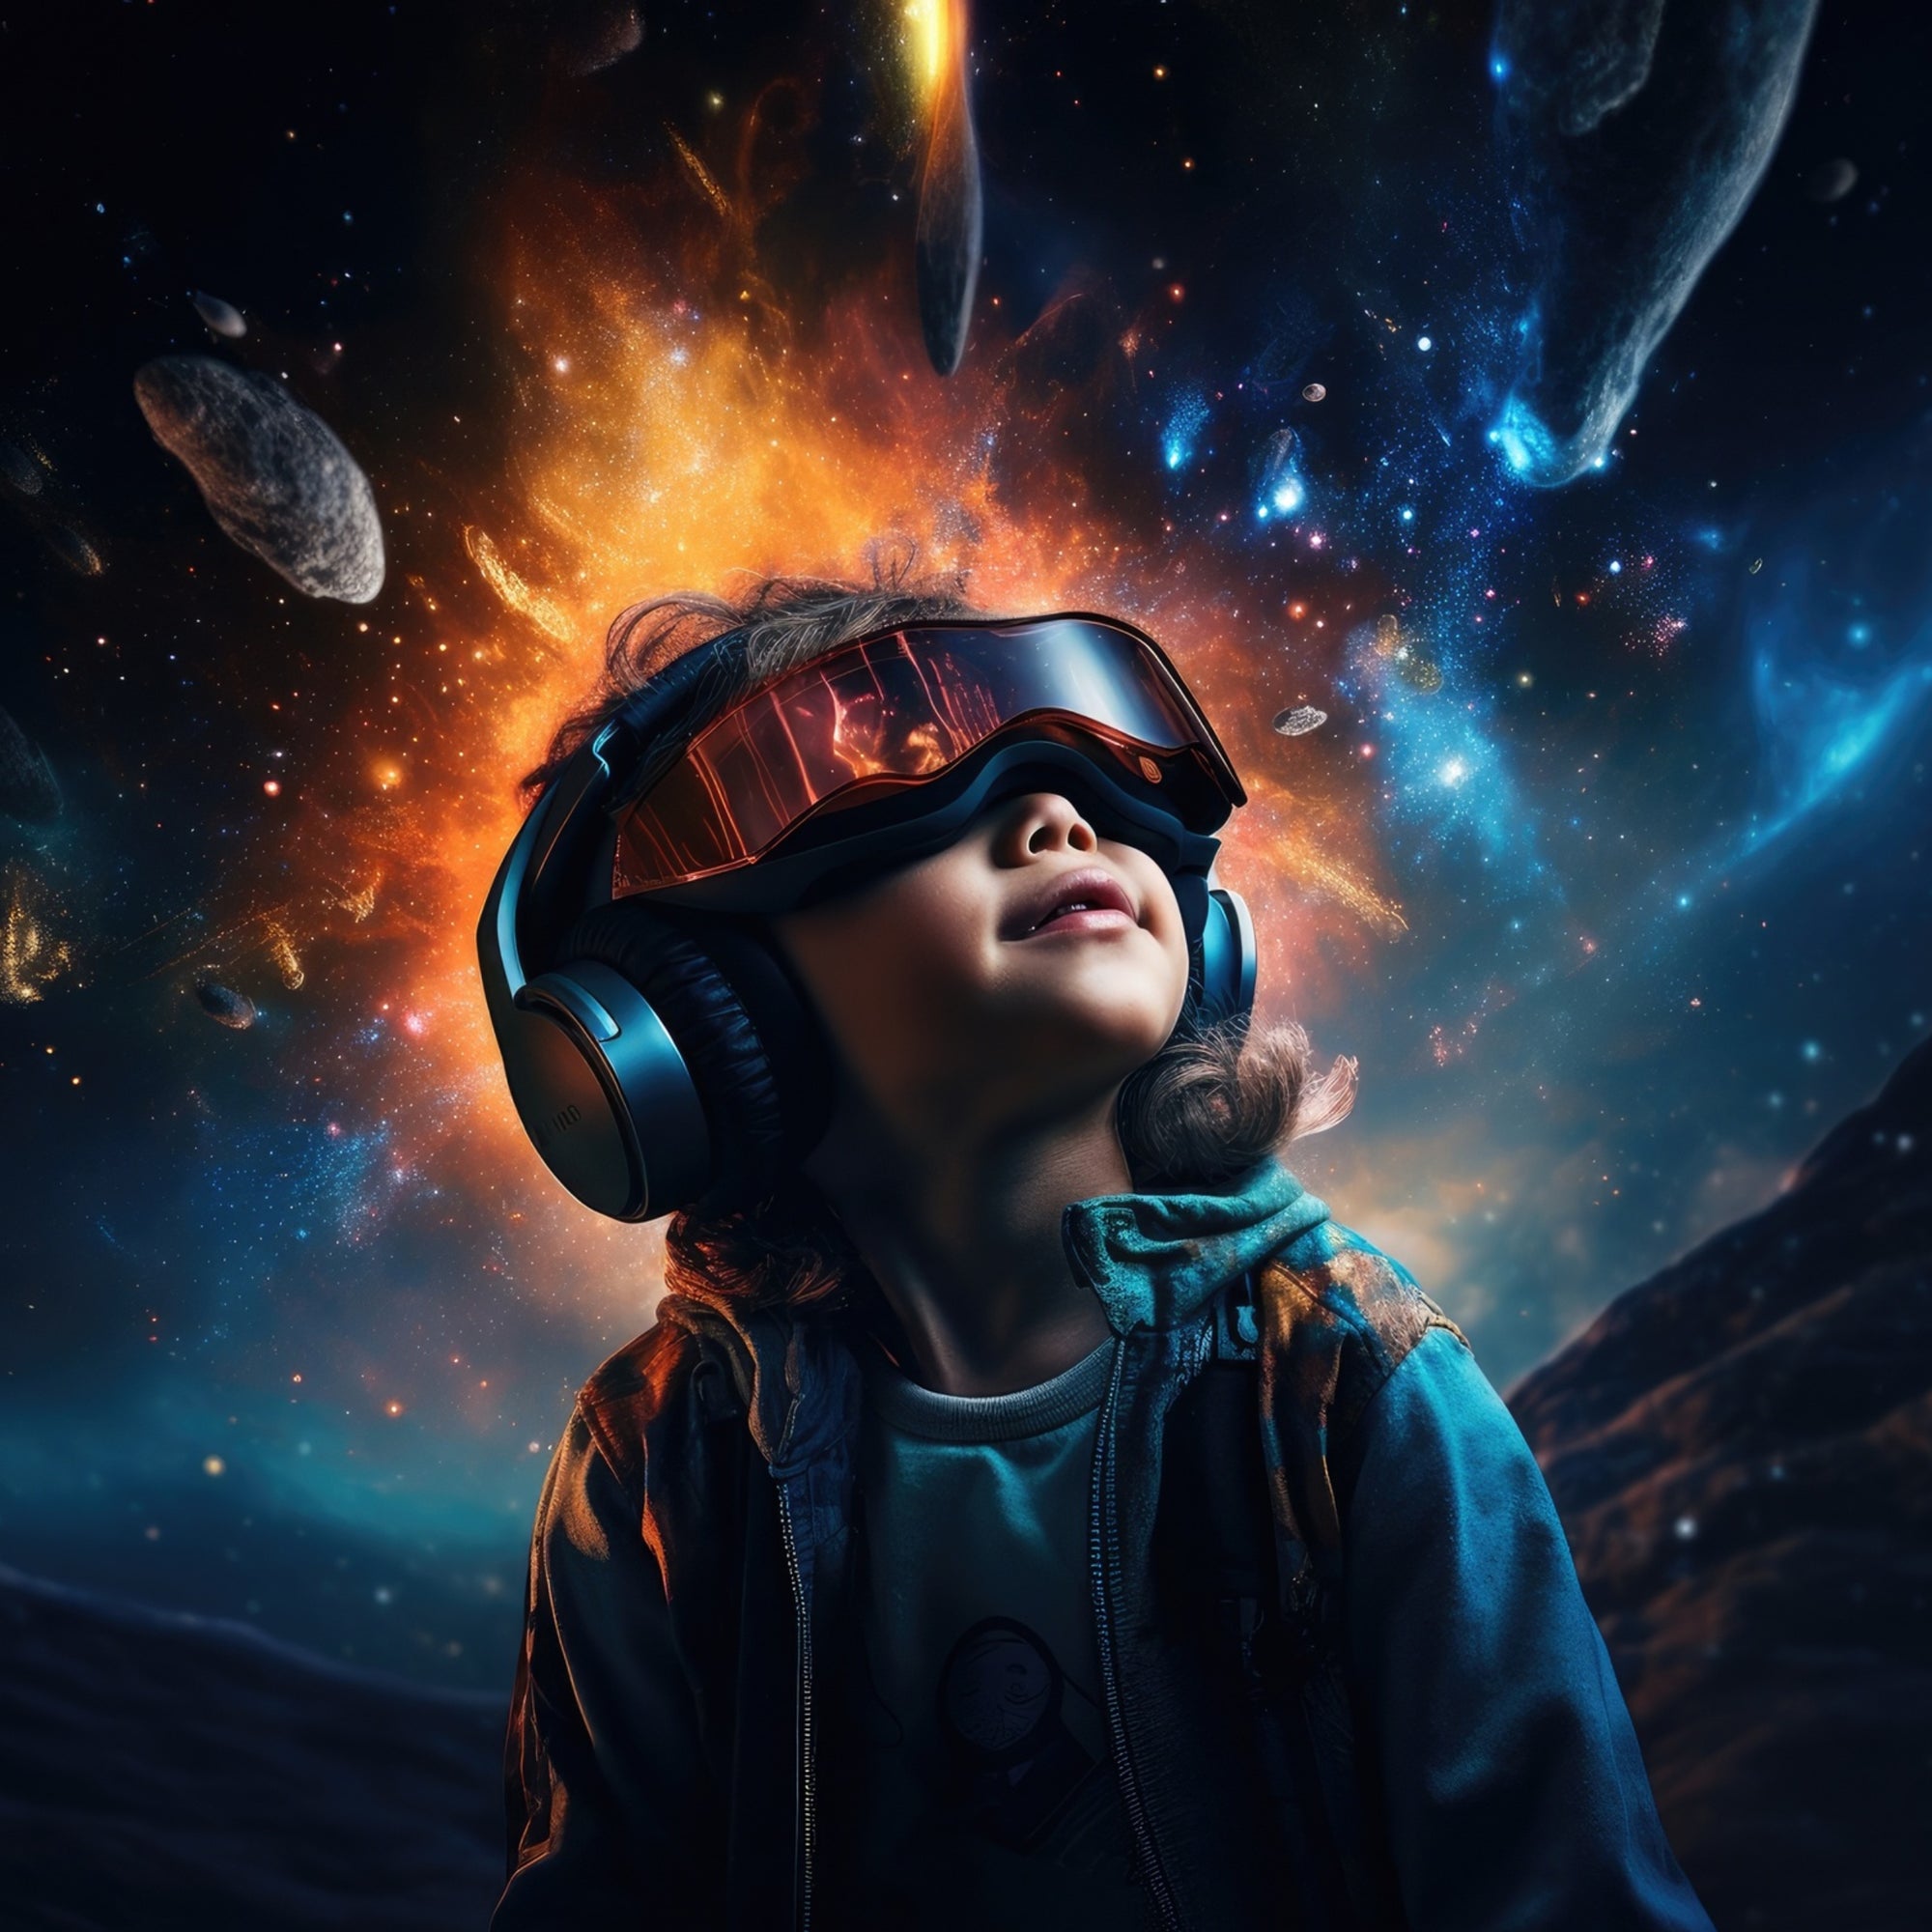 Image of a child with futuristic VR glasses on with universe background